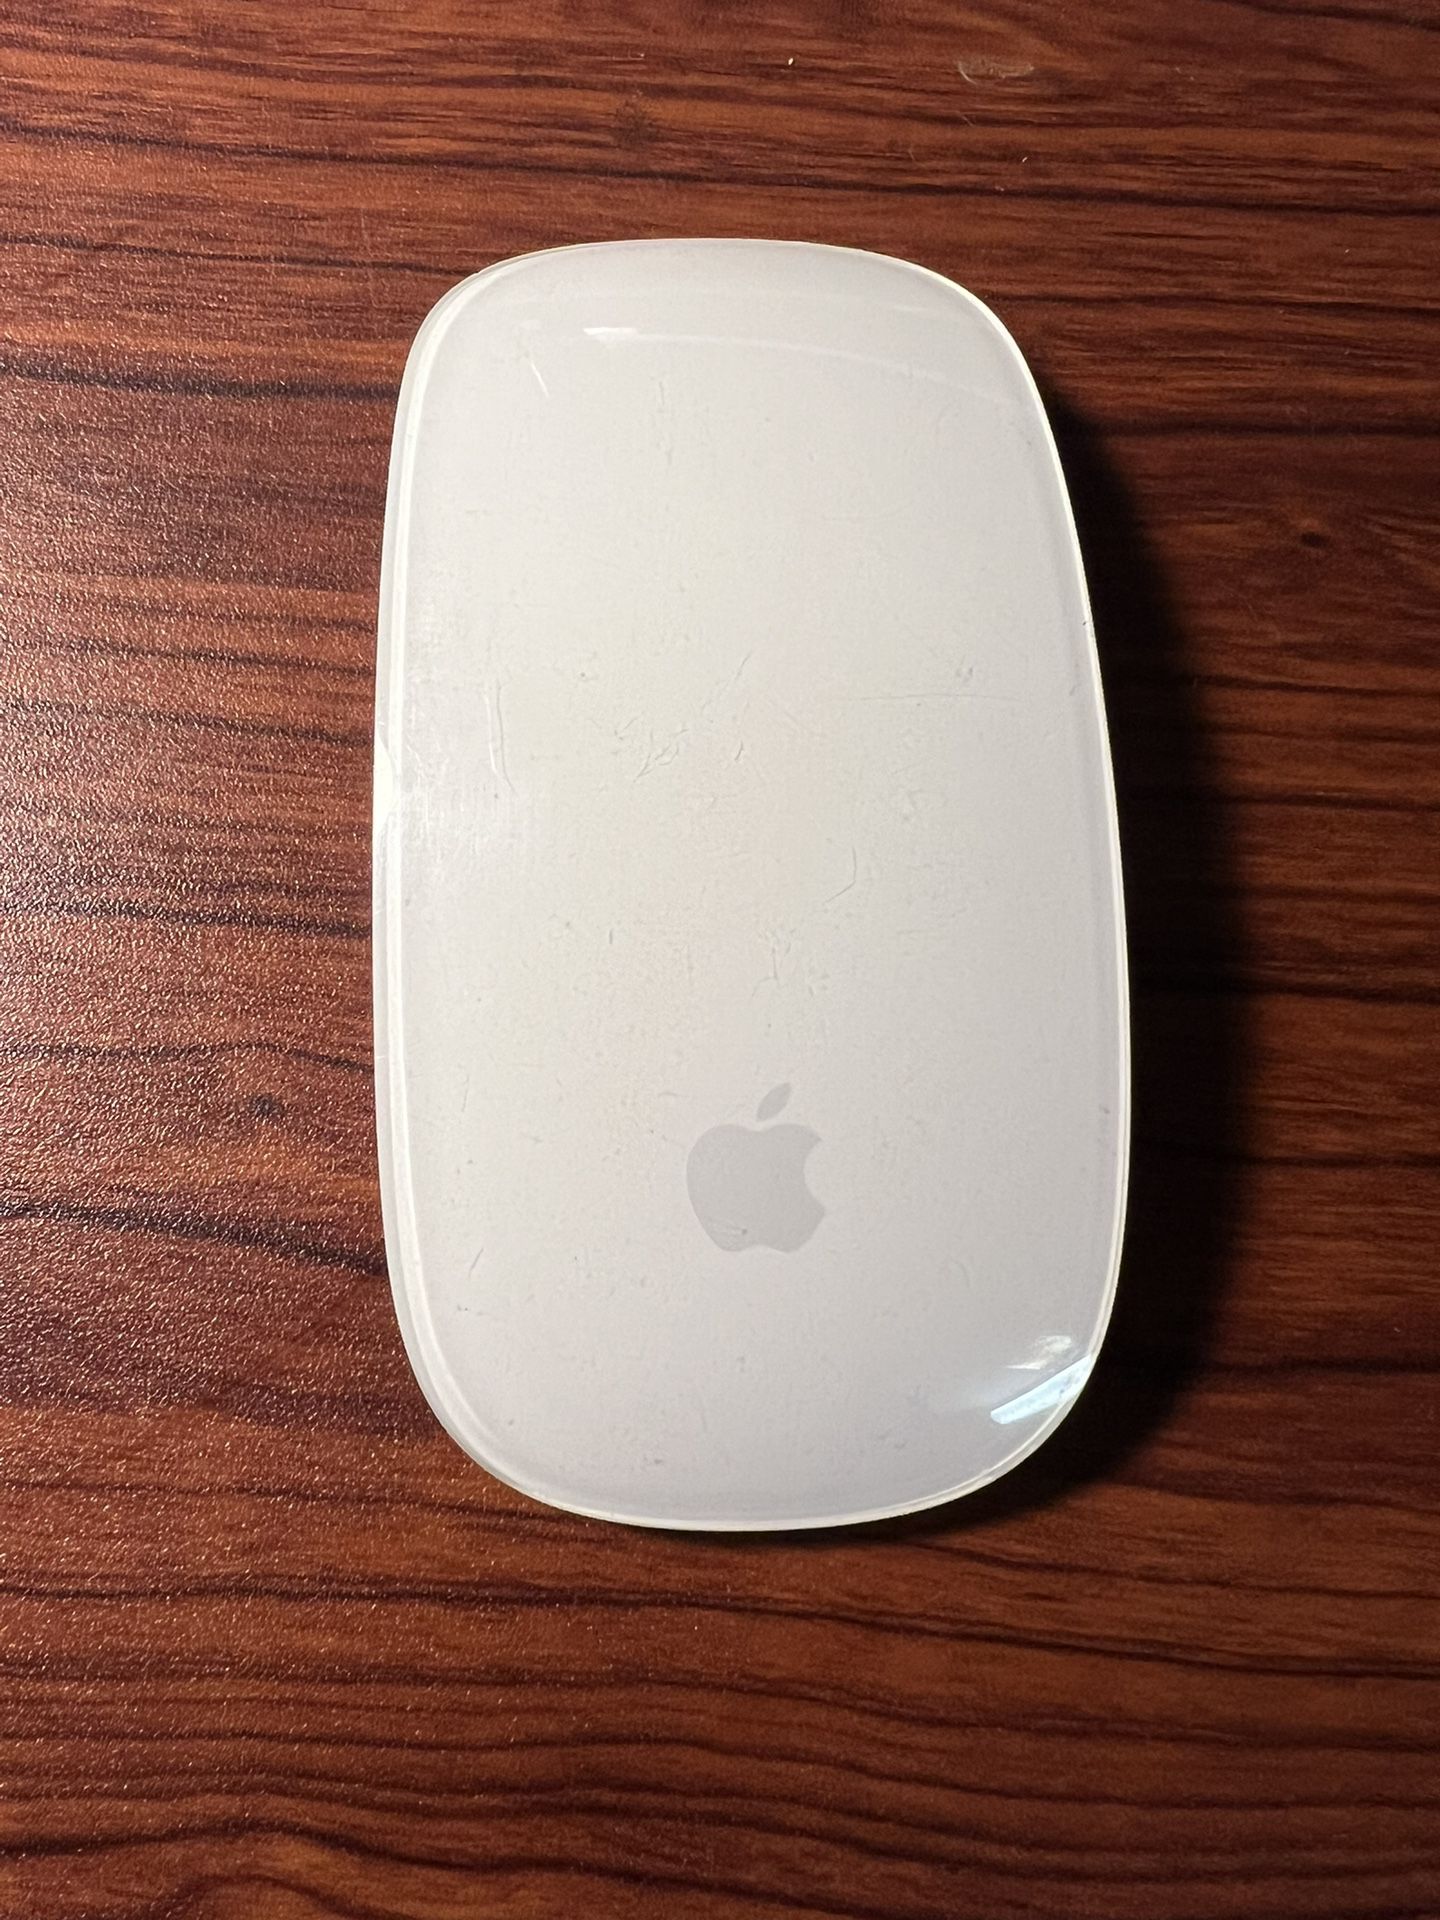 Apple Bluetooth Mouse